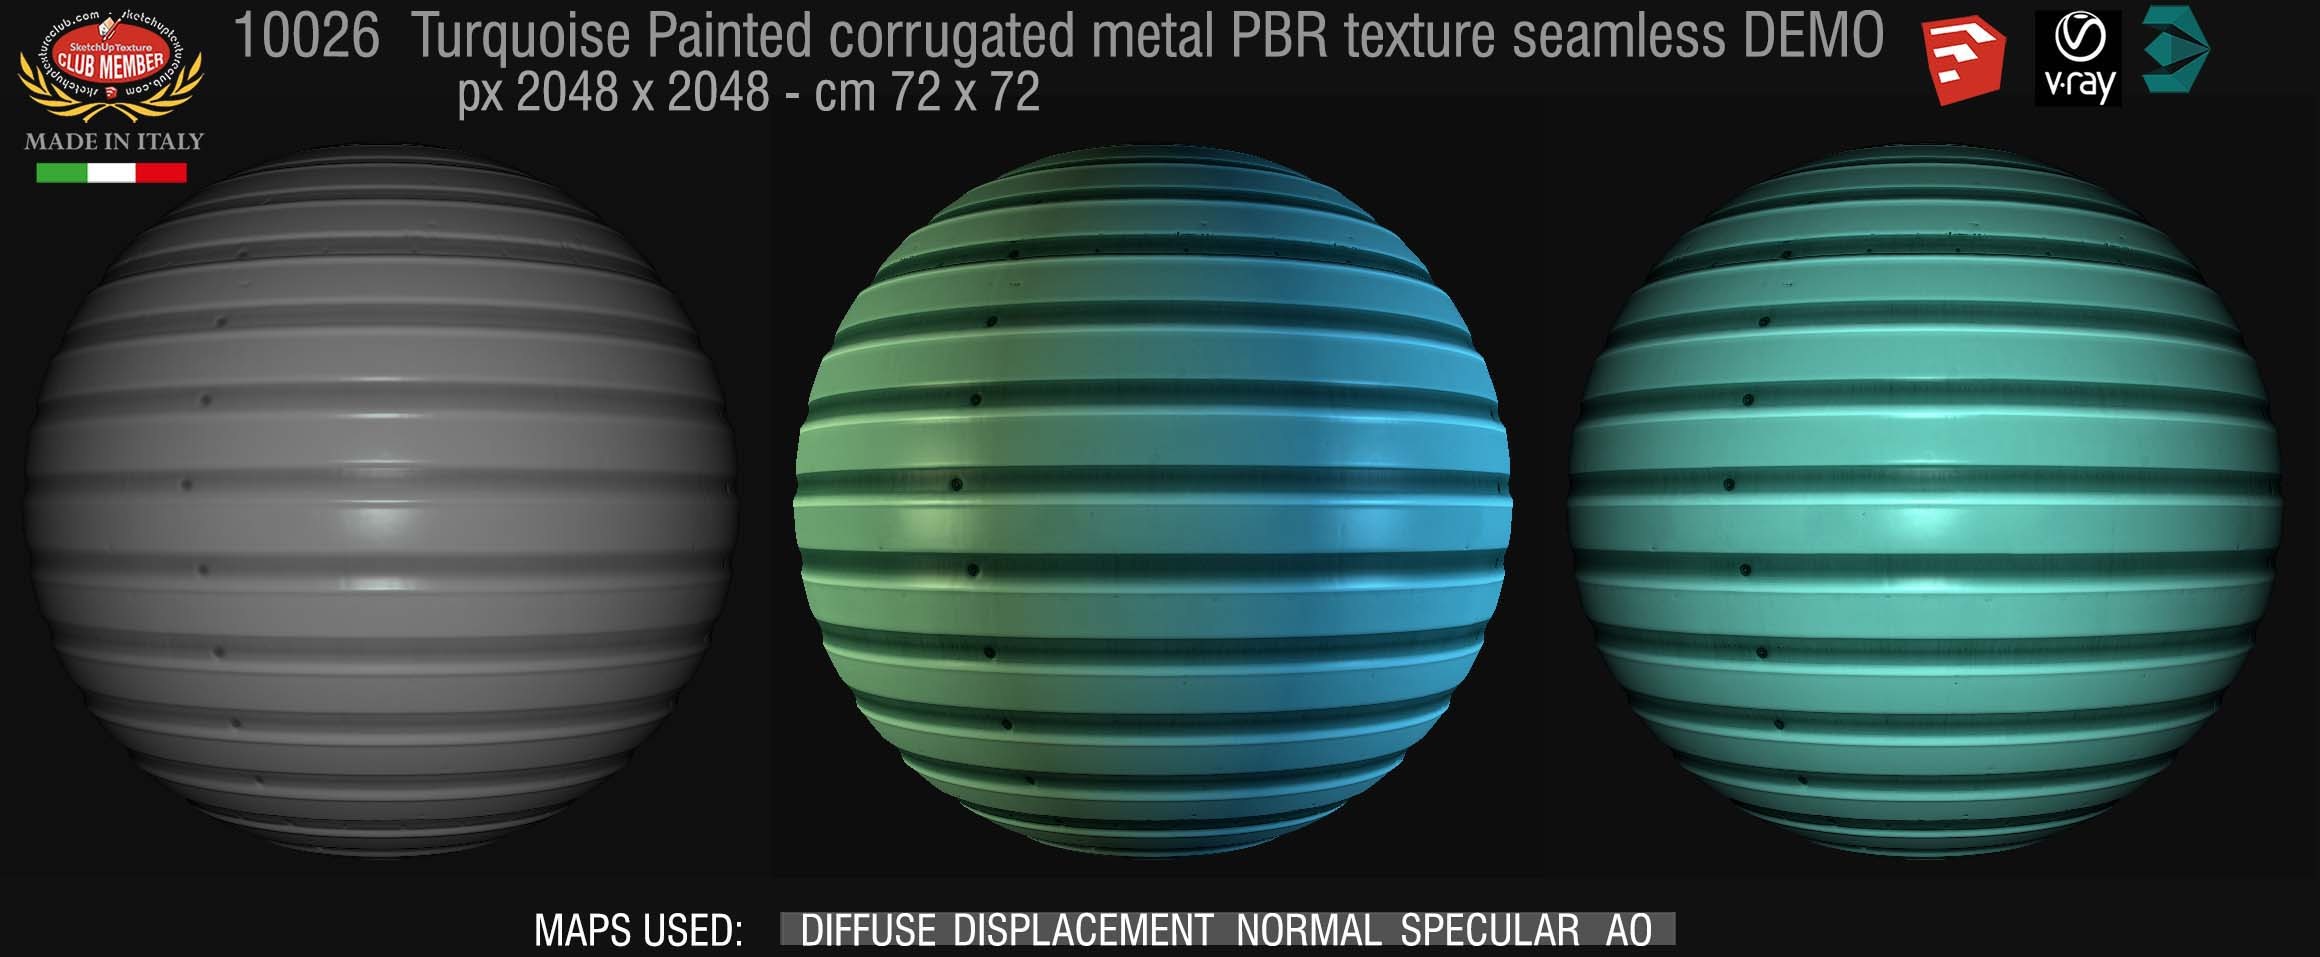 10026 Turquoise painted corrugated metal PBR texture seamless DEMO